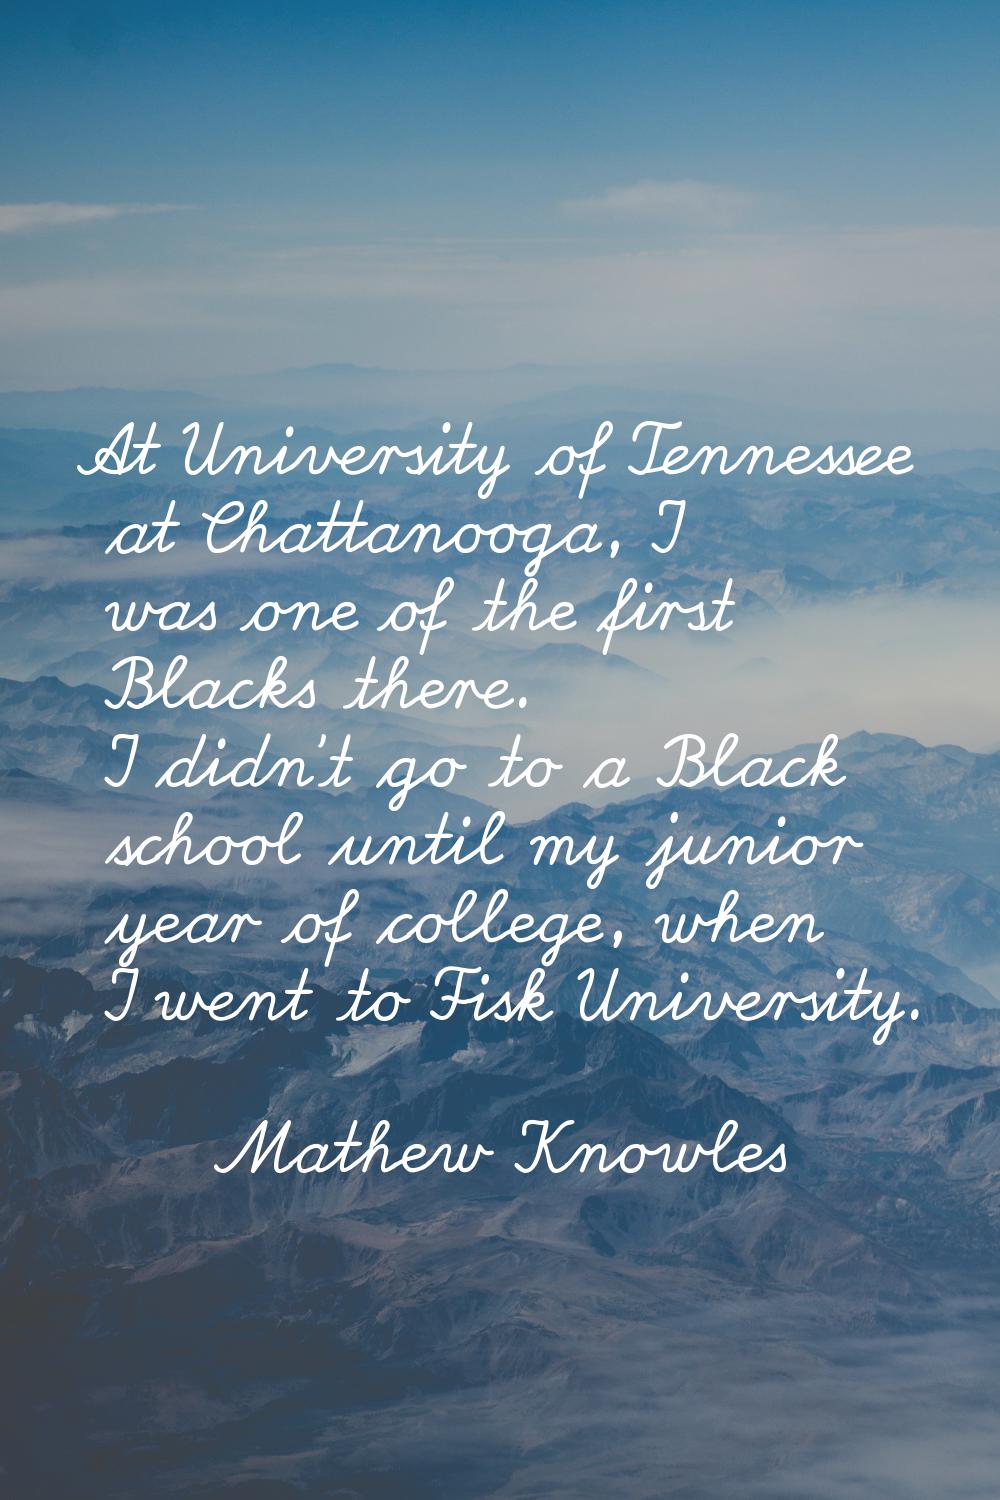 At University of Tennessee at Chattanooga, I was one of the first Blacks there. I didn't go to a Bl